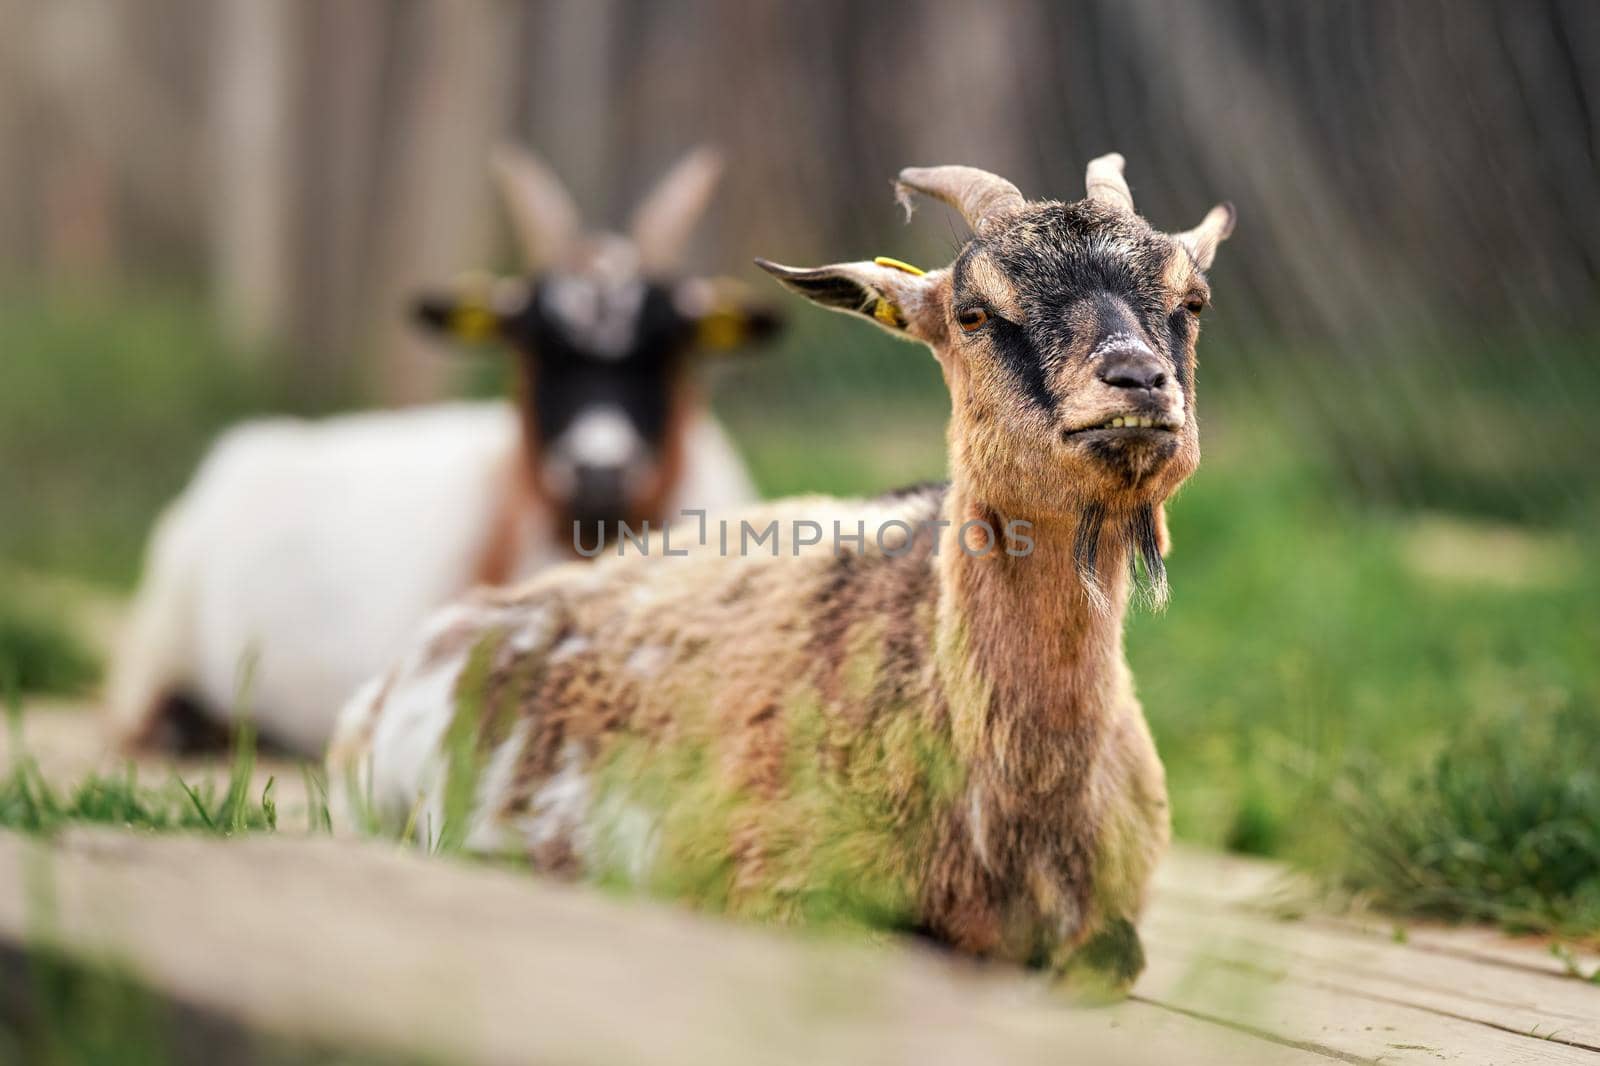 American Pygmy Cameroon goat resting on the ground, green grass near, another blurred animal background, closeup detail by Ivanko